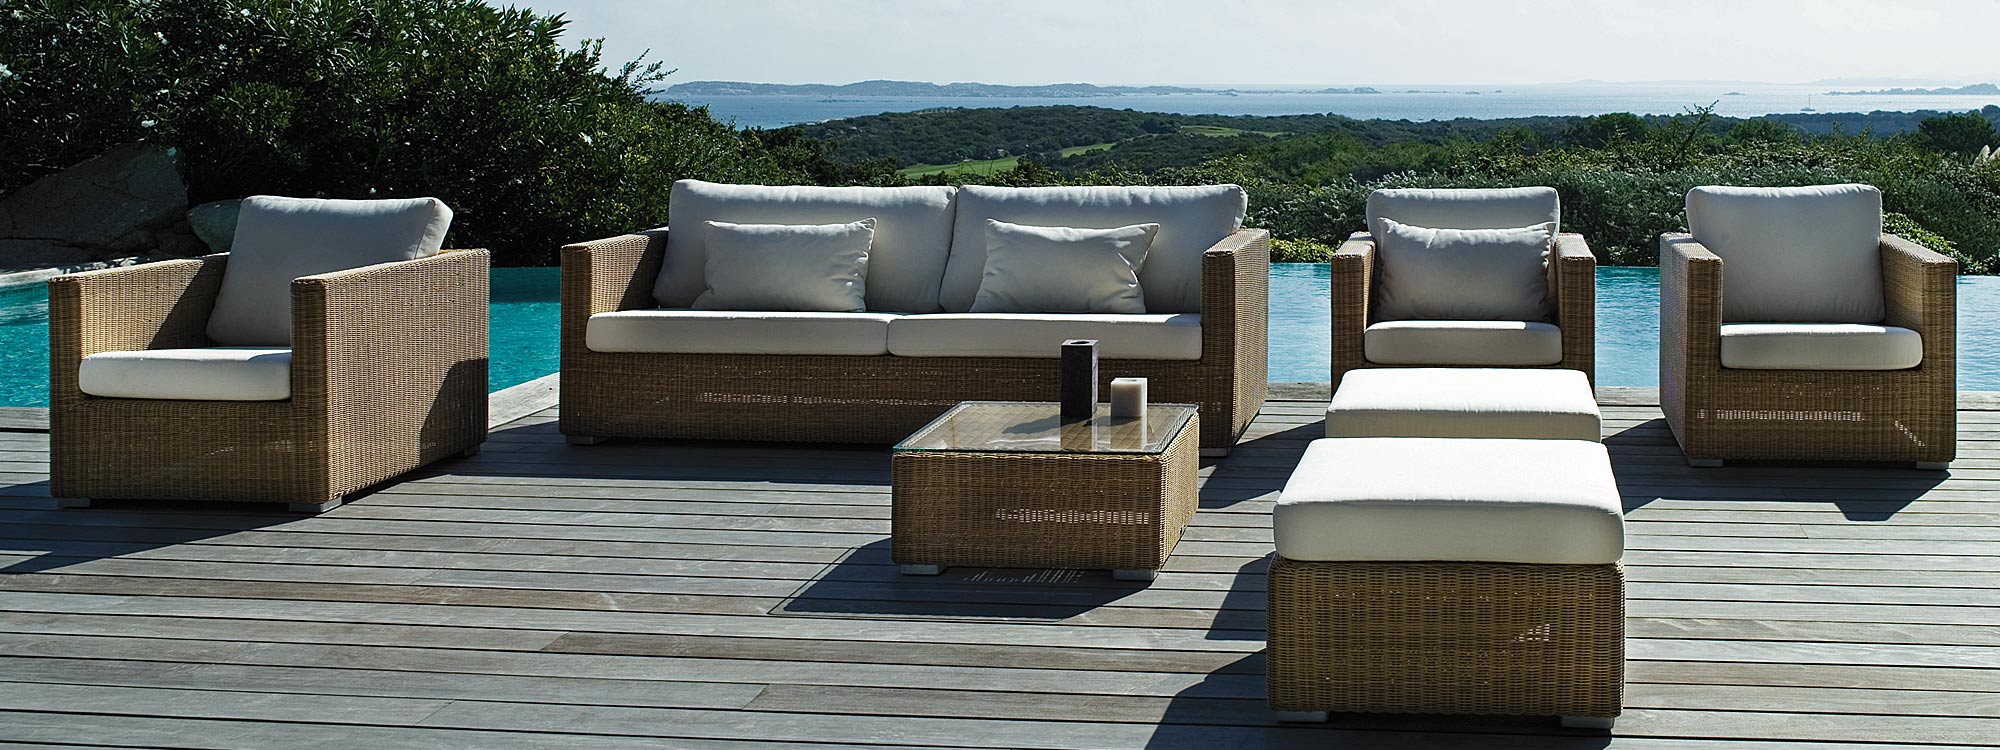 Image of natural rattan finish Chester garden sofa set on wooden decked poolside by Cane-line